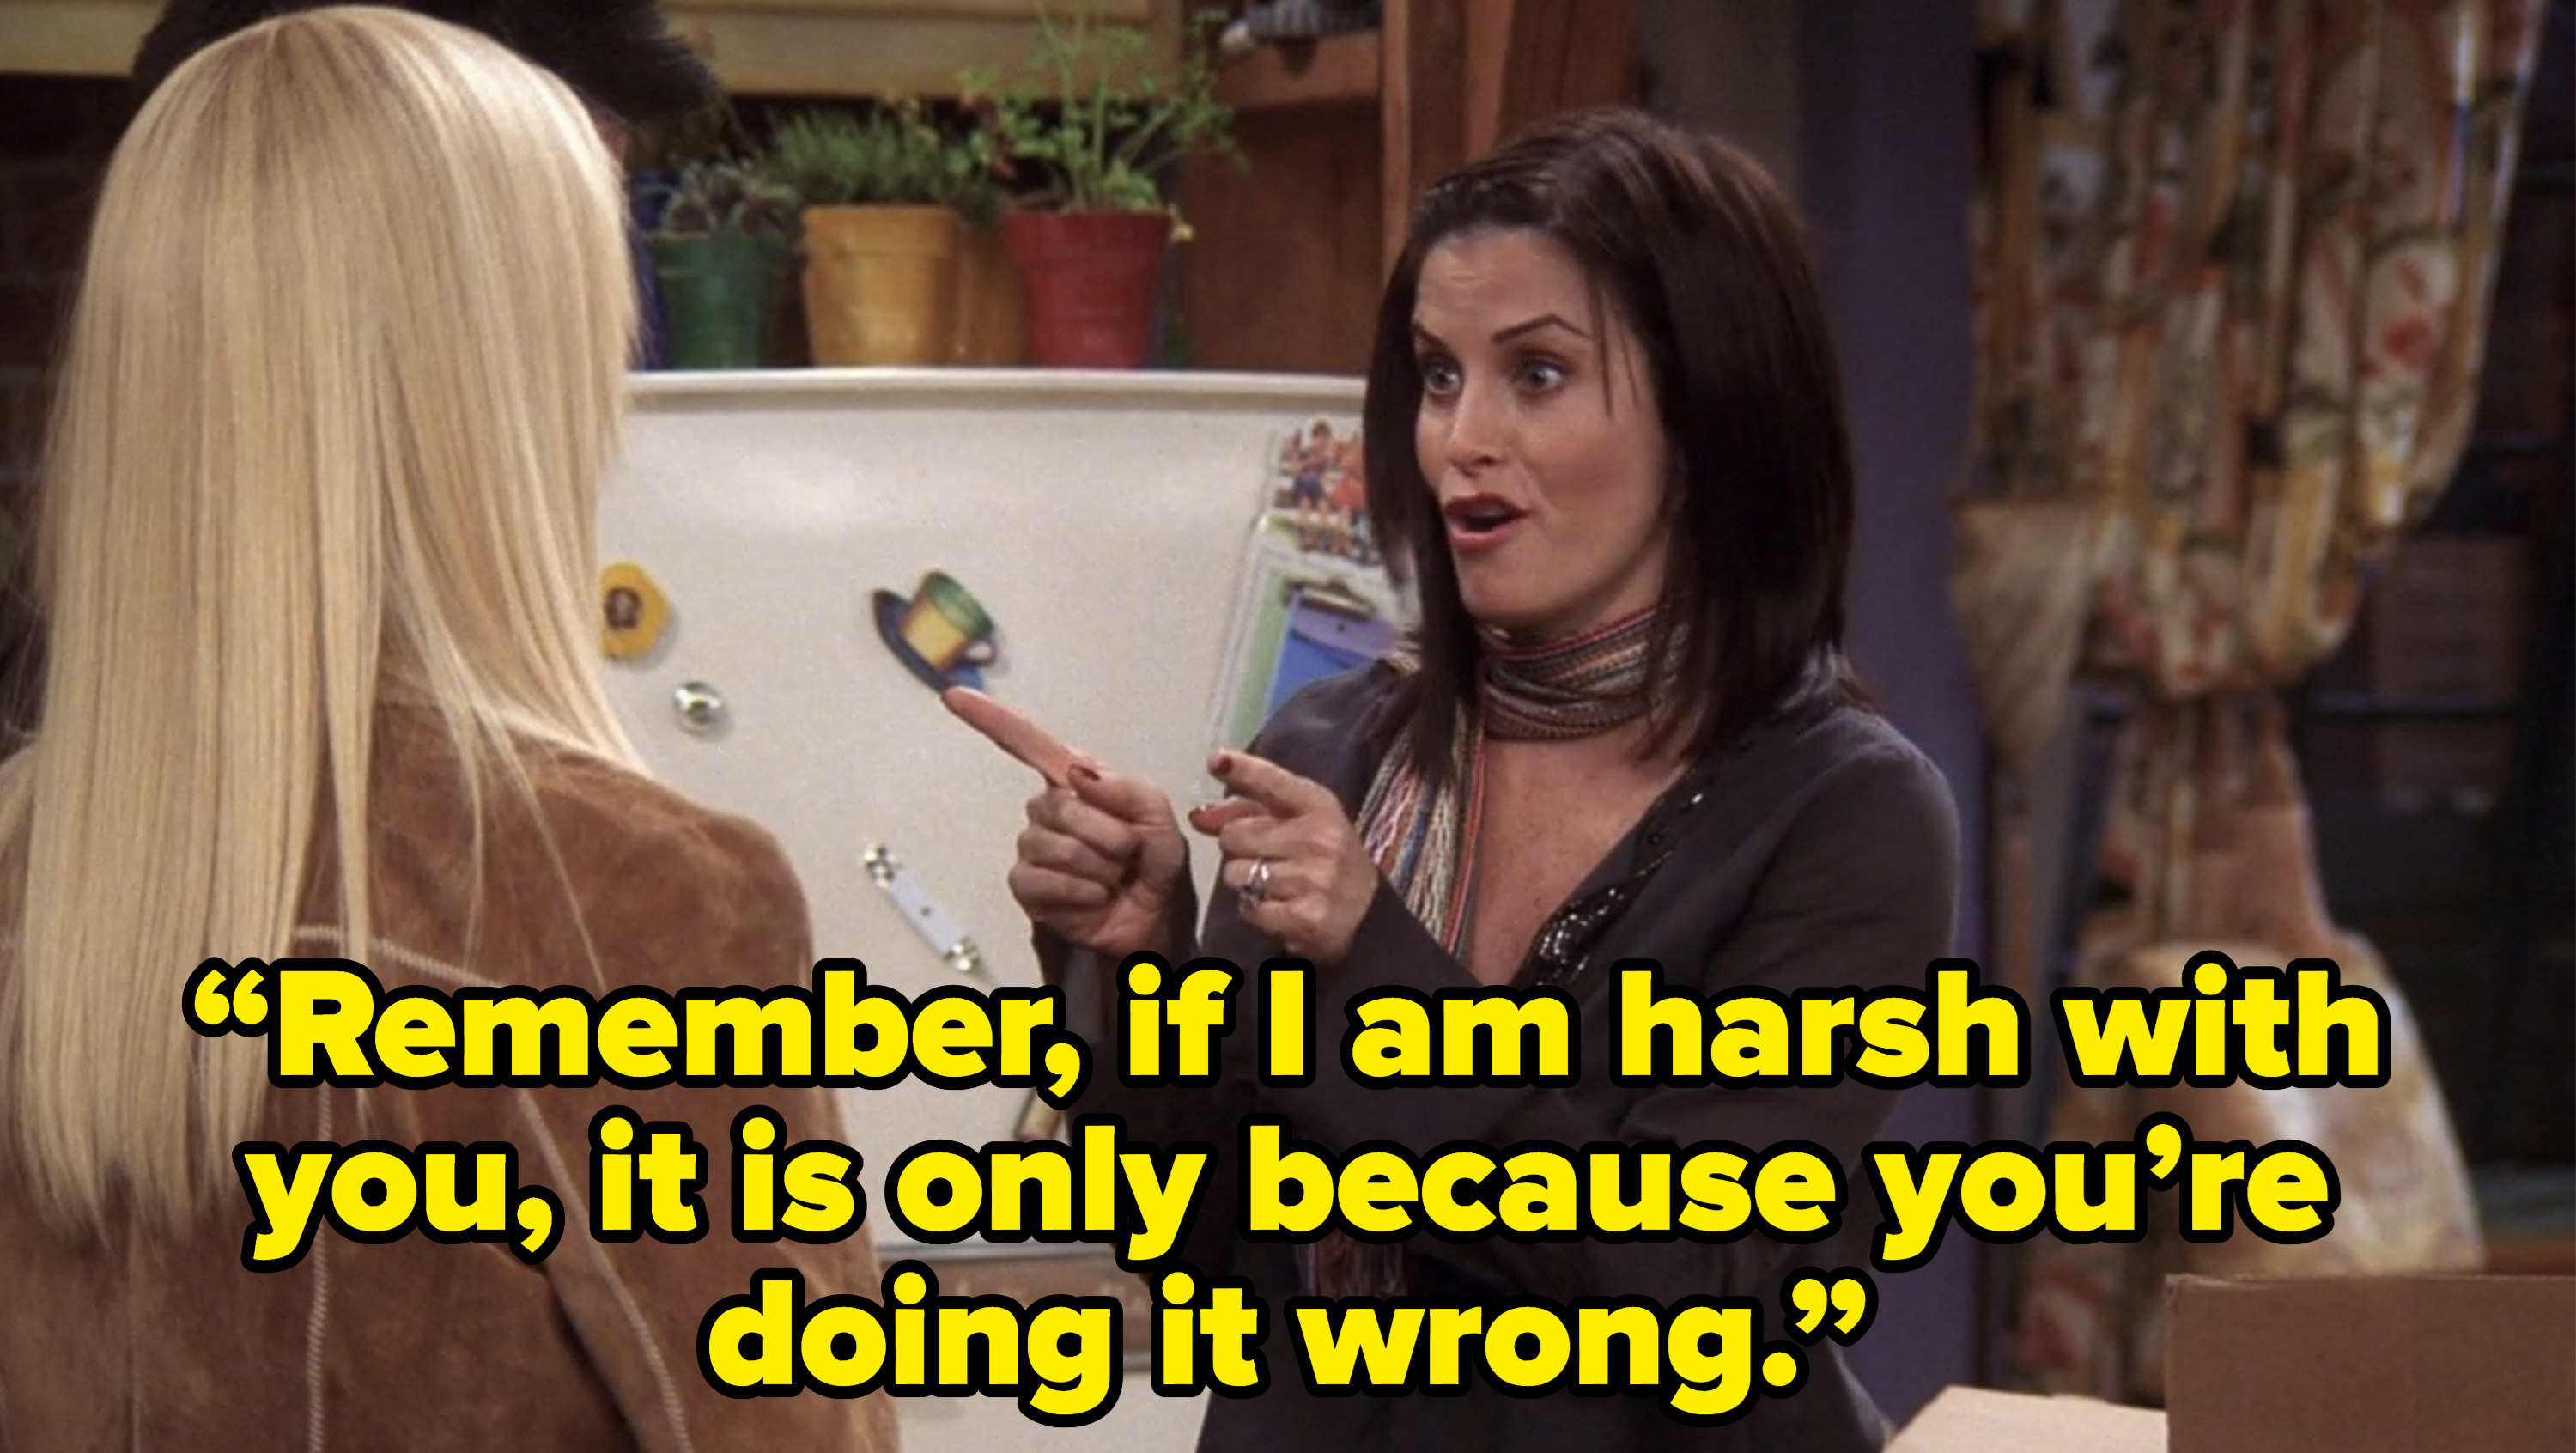 monica telling joey and phoebe “Remember, if I am harsh with you, it is only because you’re doing it wrong.” on friends